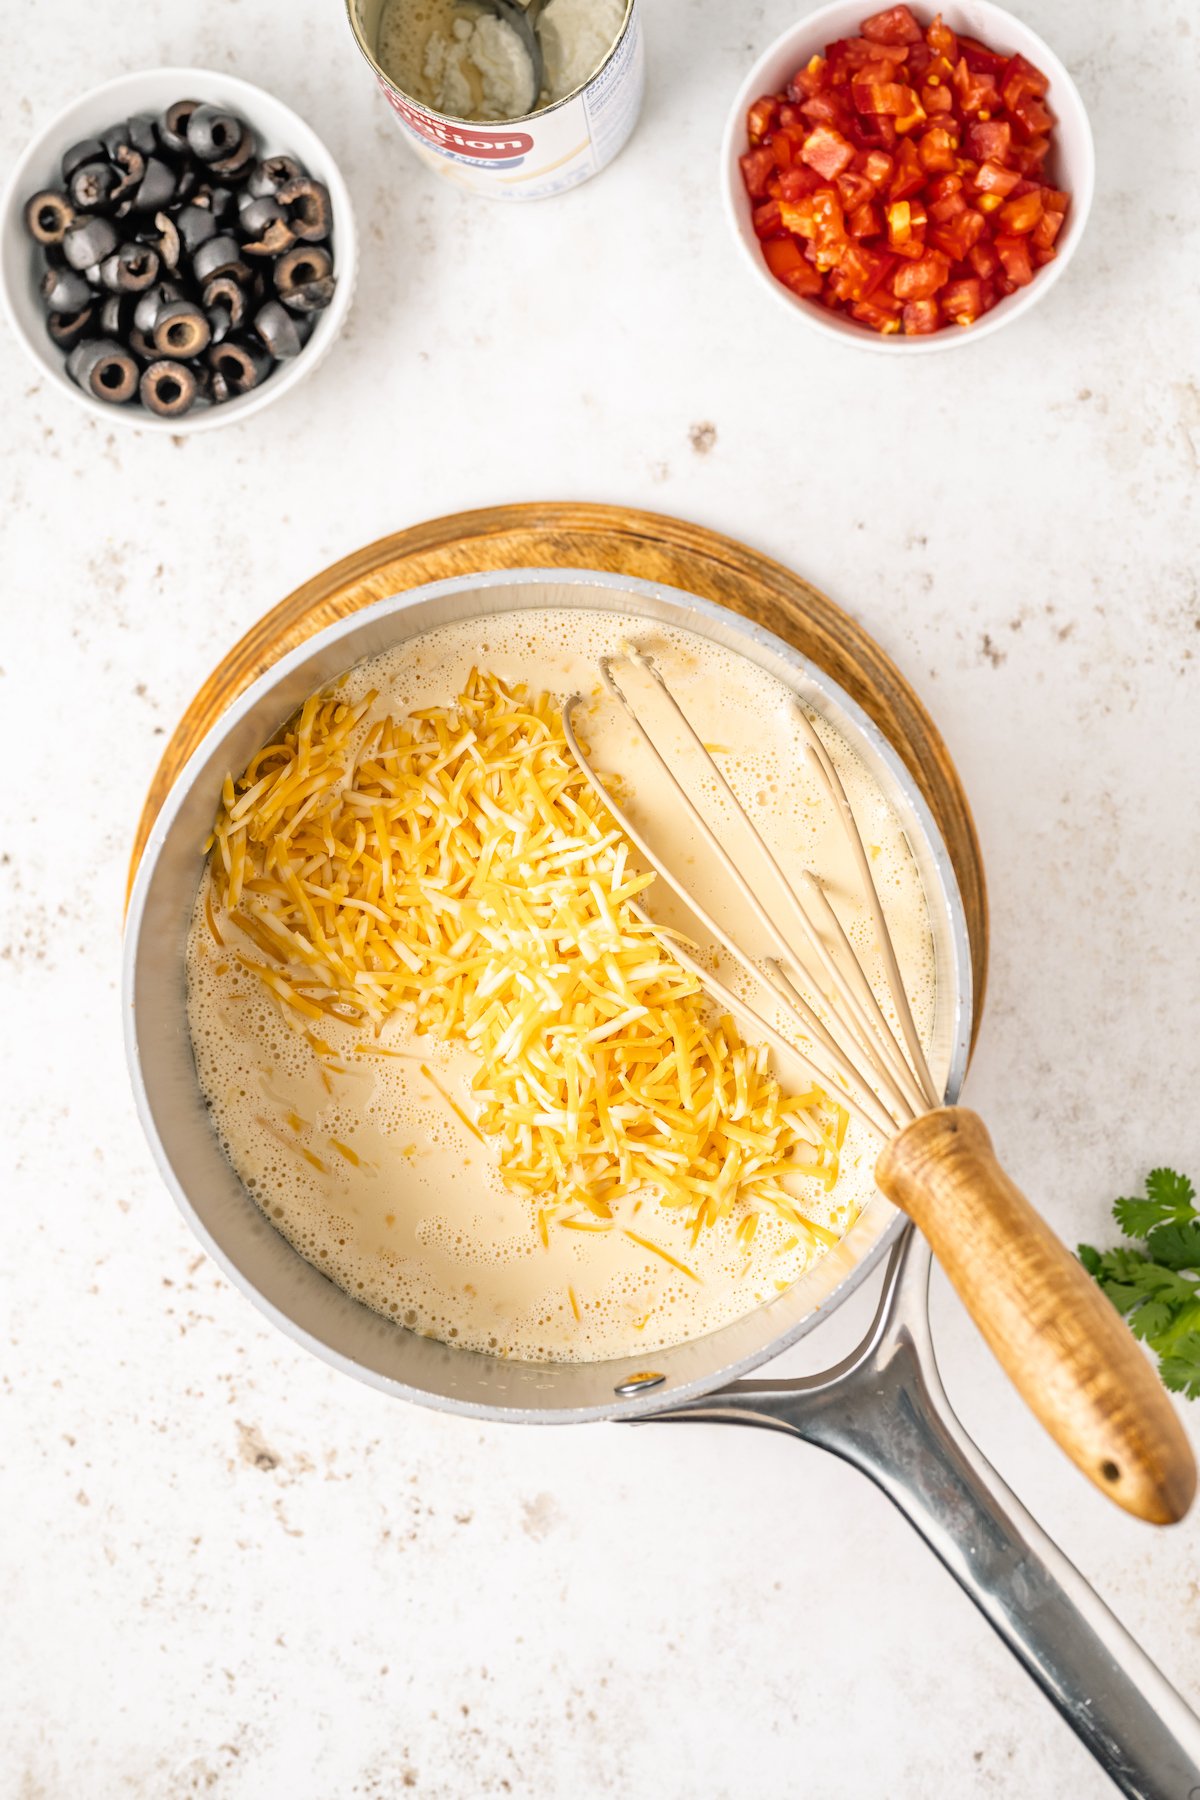 A small sauce pan with condensed milk and shredded cheese.